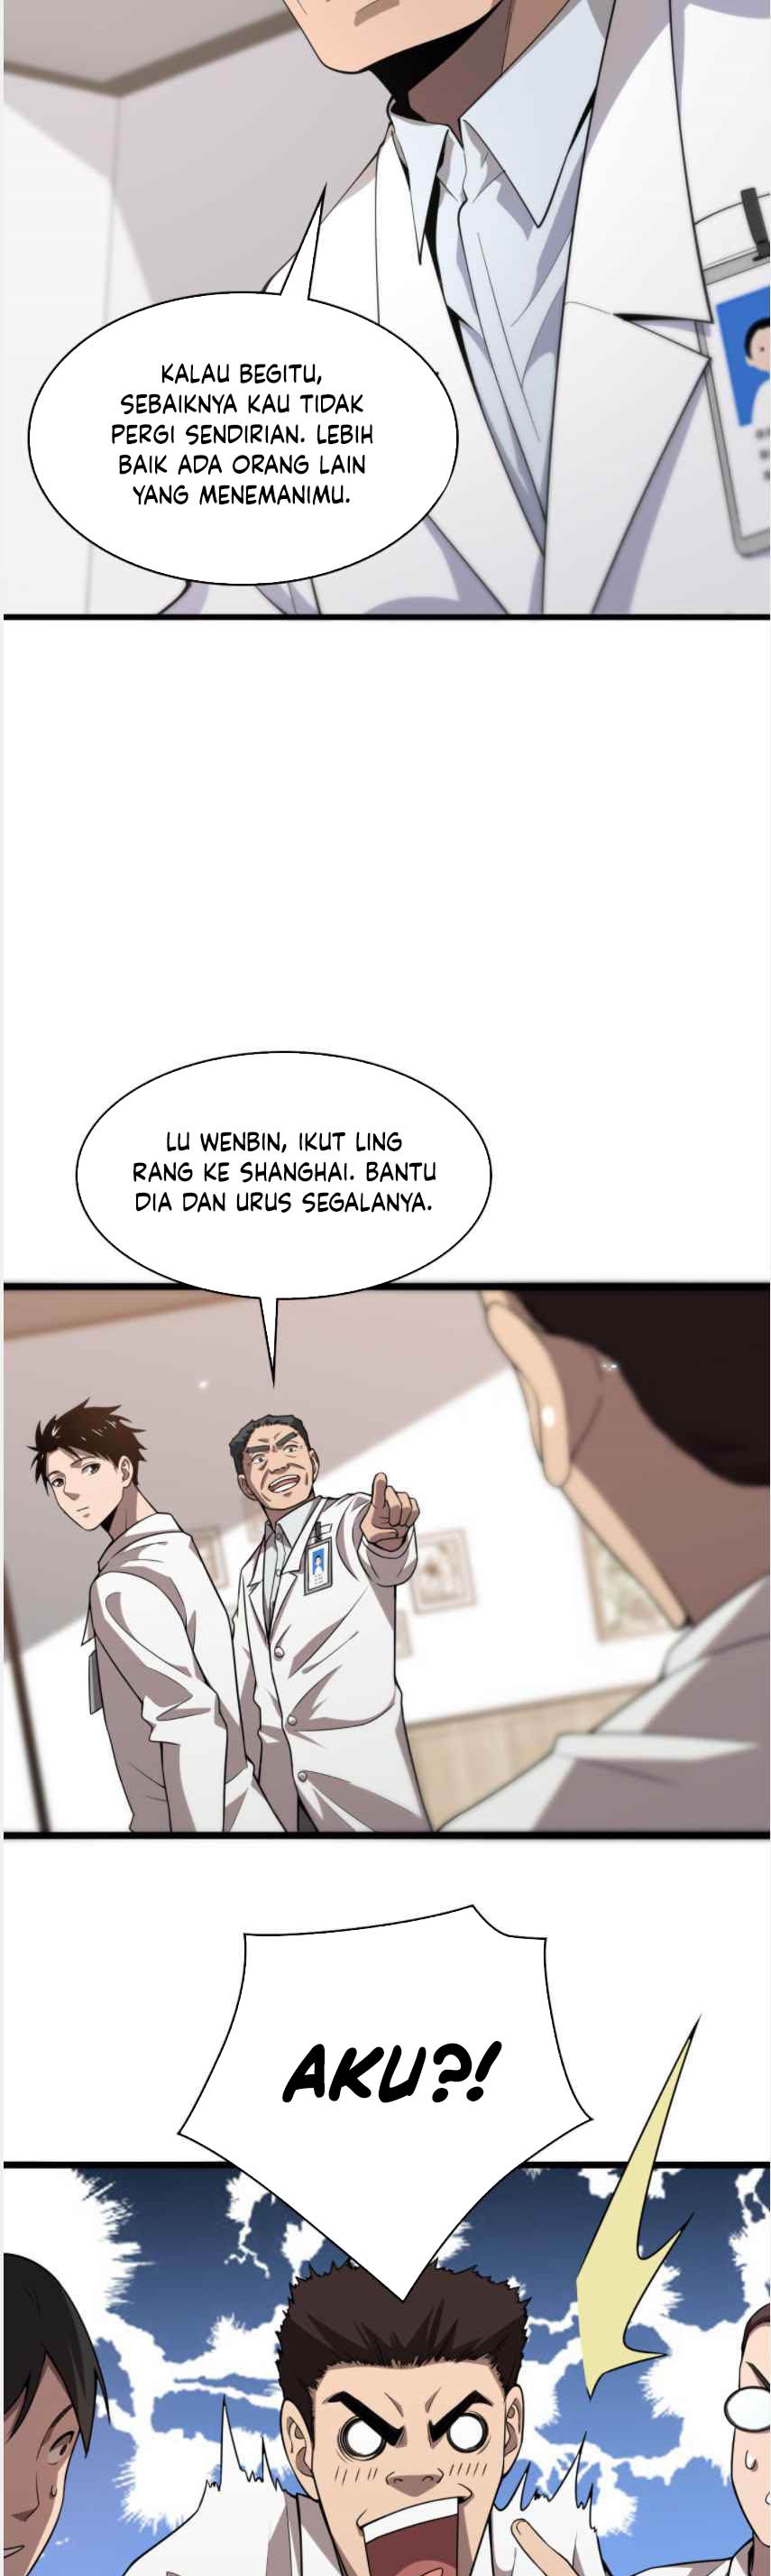 Great Doctor Ling Ran Chapter 77